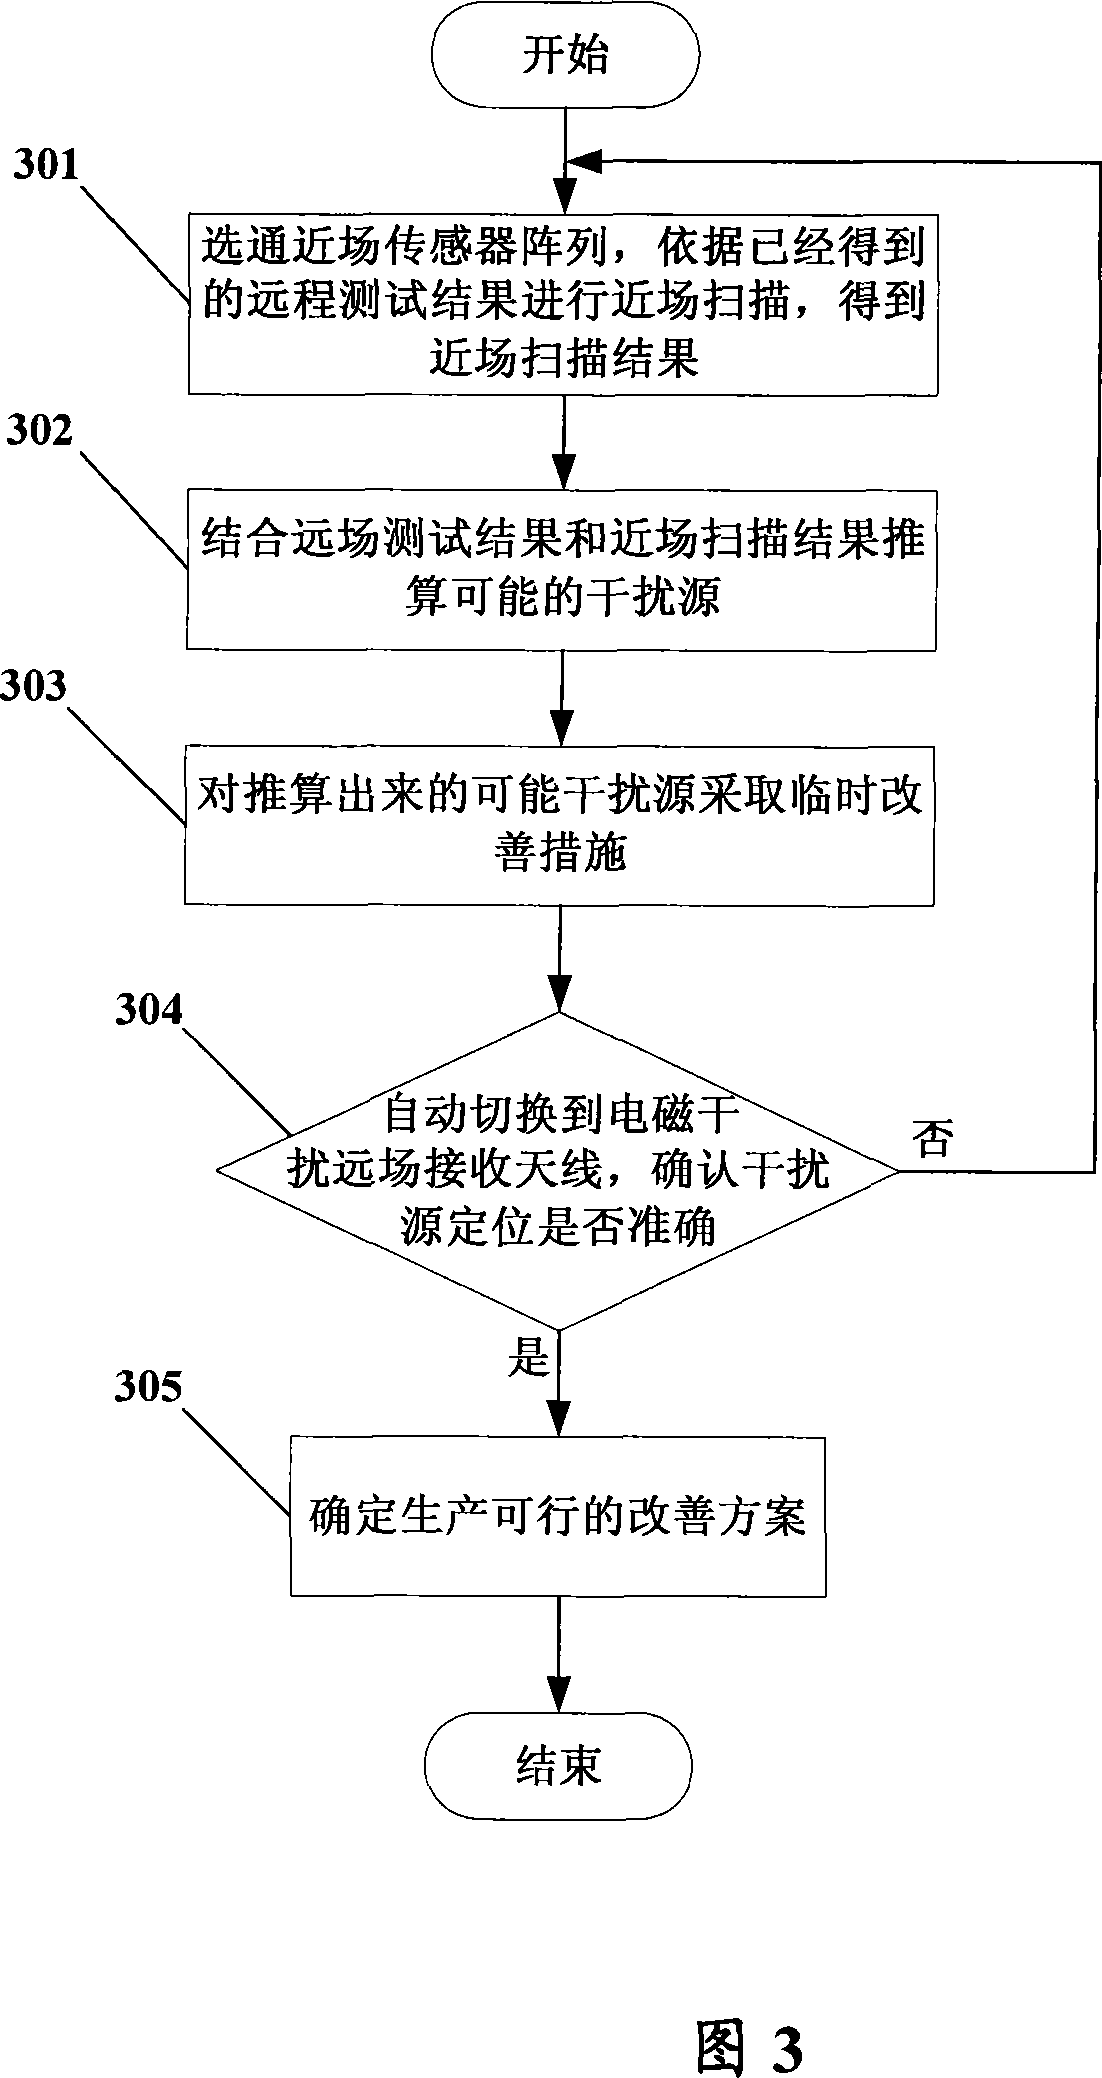 Electromagnetic interference scanning device and method